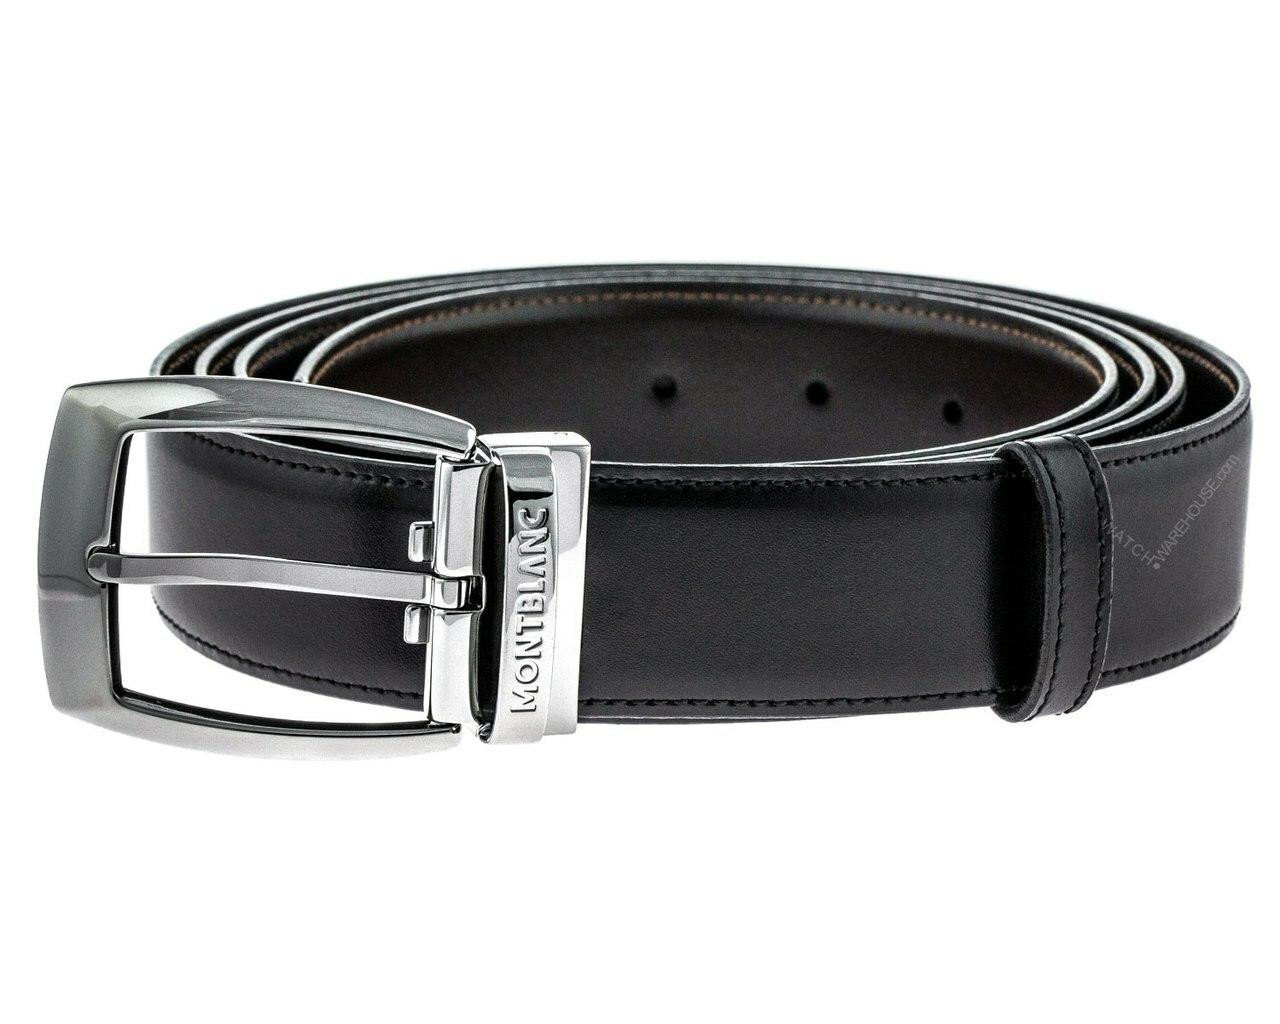 Gift box with reversible belt in saffiano leather and